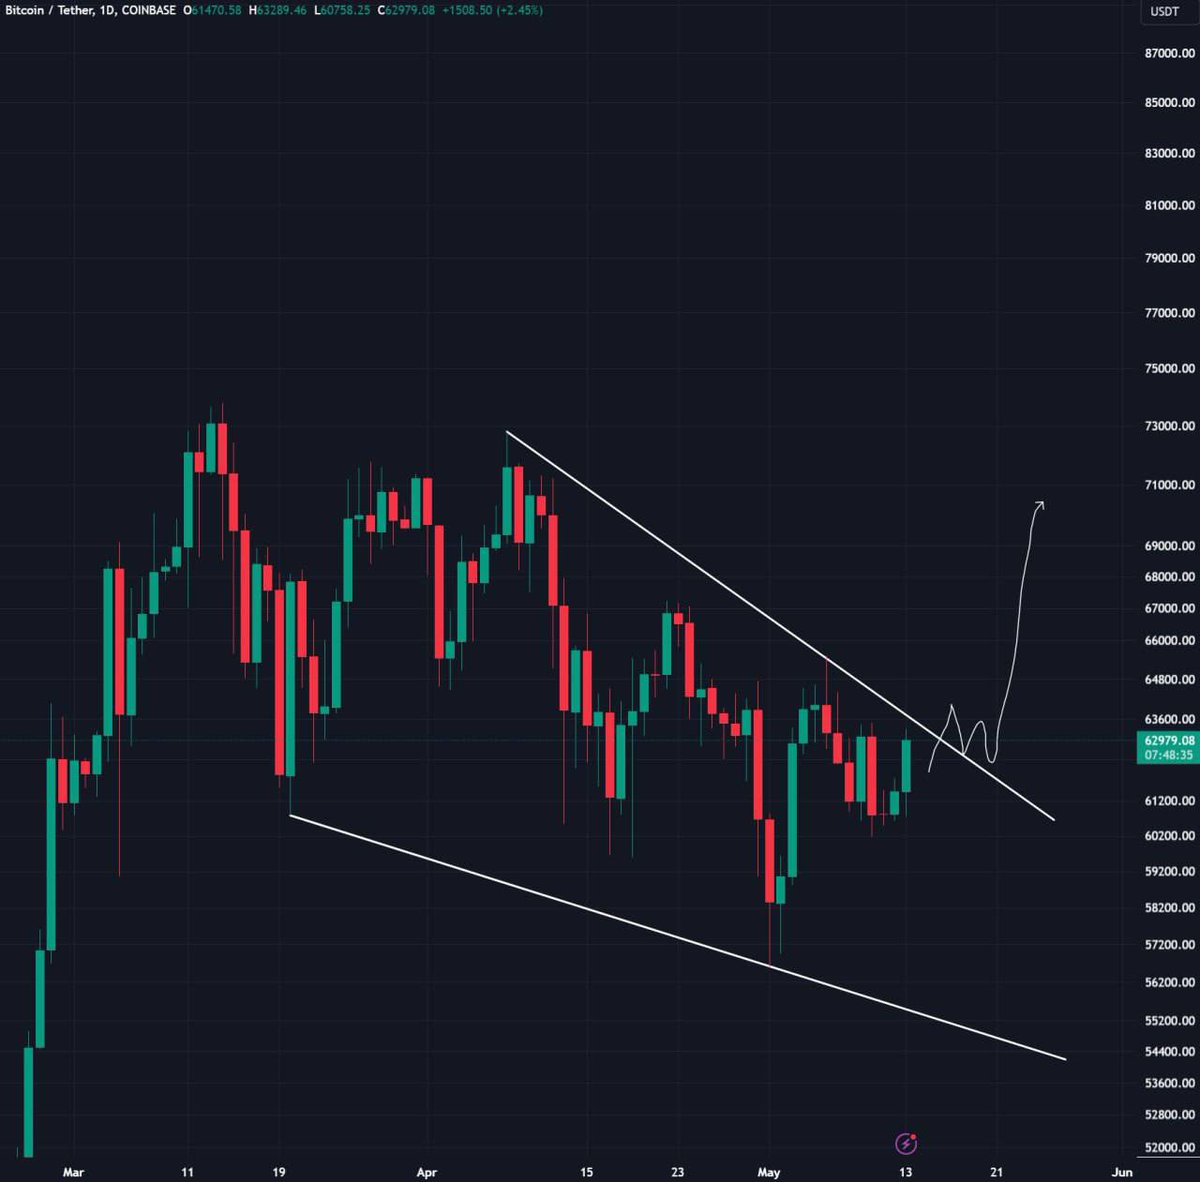 BITCOIN IS BREAKING OUT 🔥 $BTC IS MOVING UP WITH ALL THE BULLISH NEWS OF MANY MAJOR BANKS BUYING BTC SPOT ETFS. IF BTC MANAGES TO CLOSE A DAILY CANDLE ABOVE $63.6K, WE CAN EXPECT A NICE PUMP. LETS PRAY FOR $69,000🙏